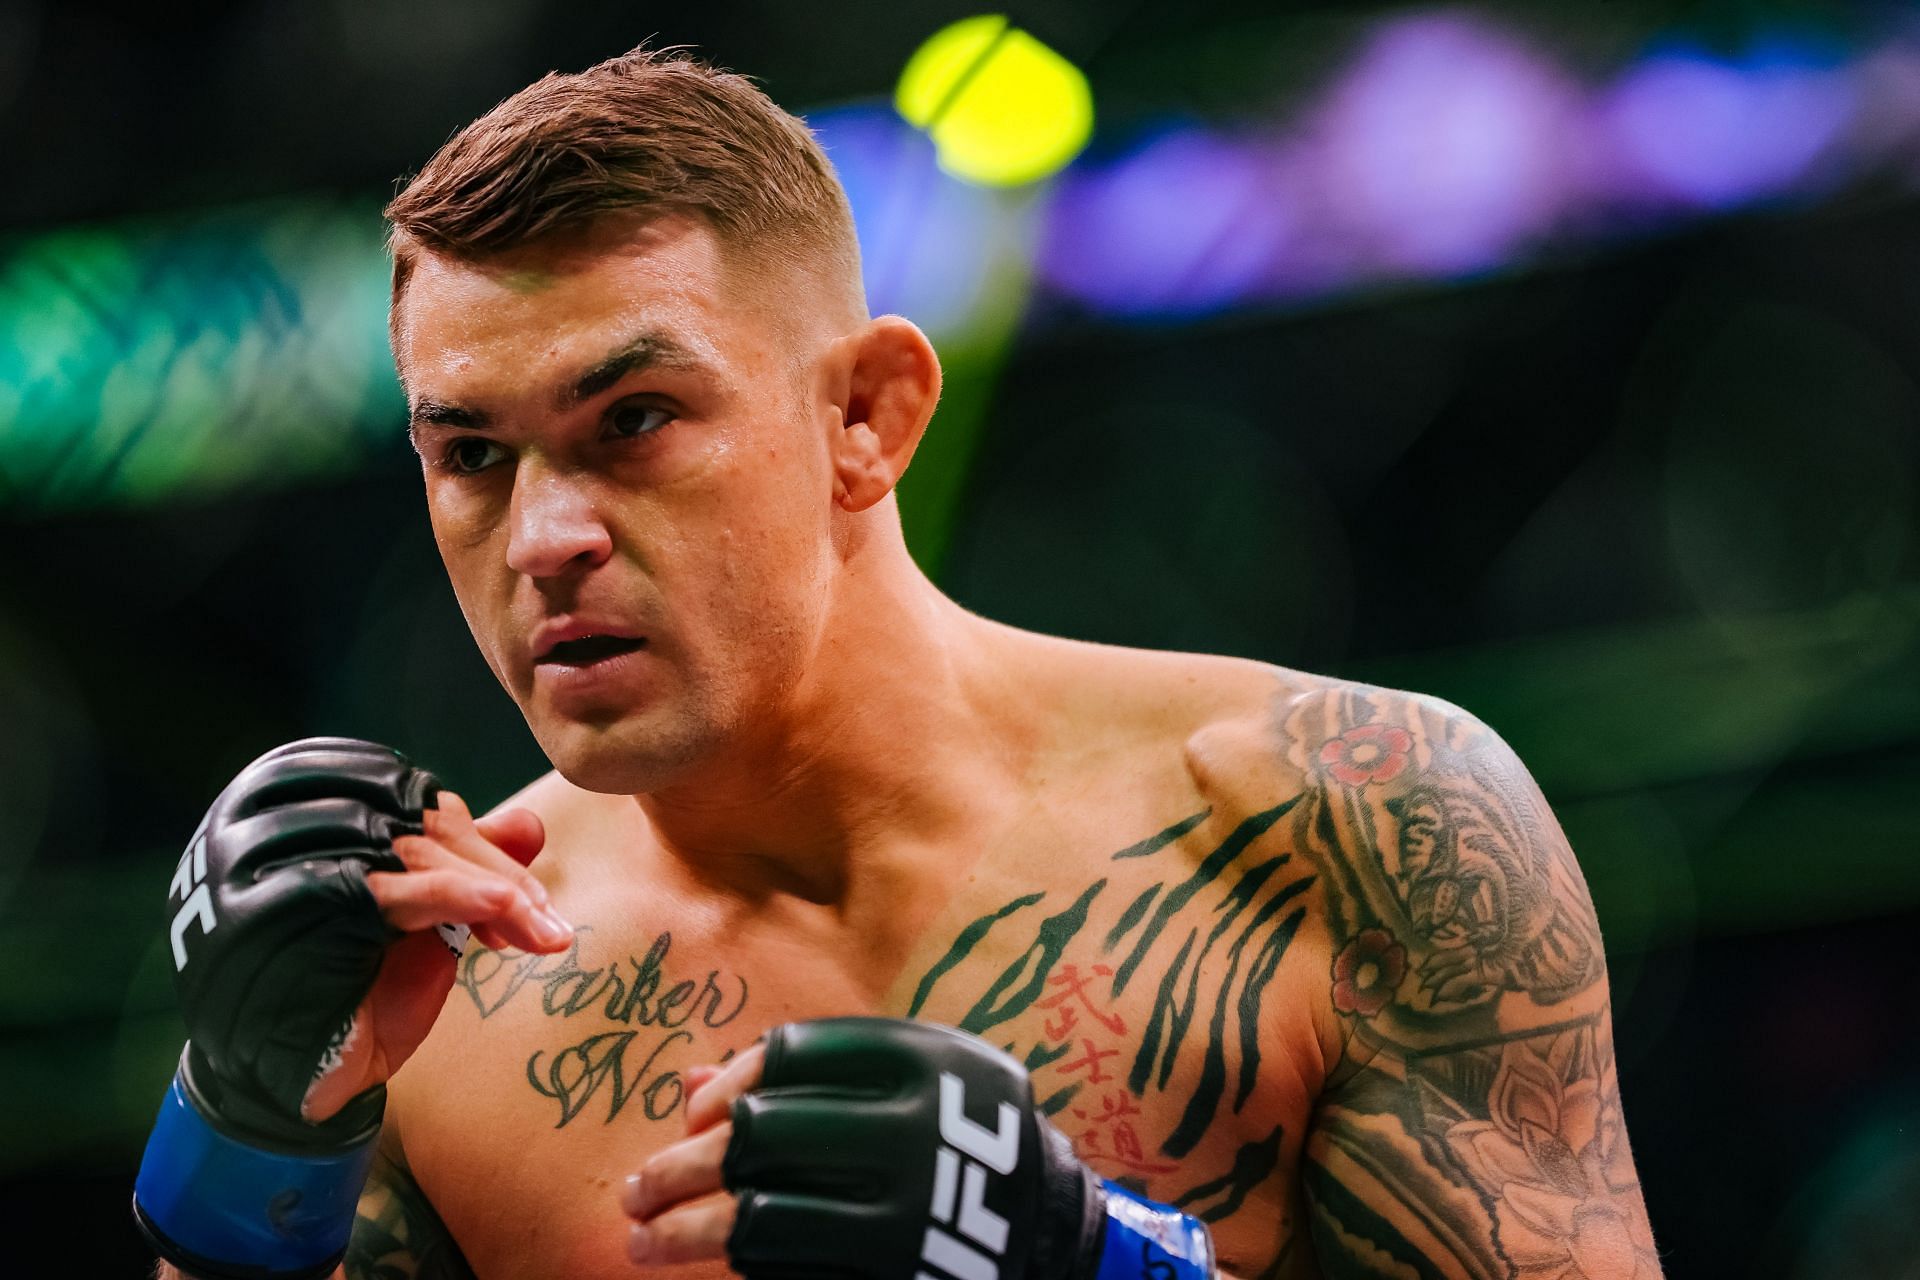 Dustin Poirier admitted to betting on himself on a regular basis